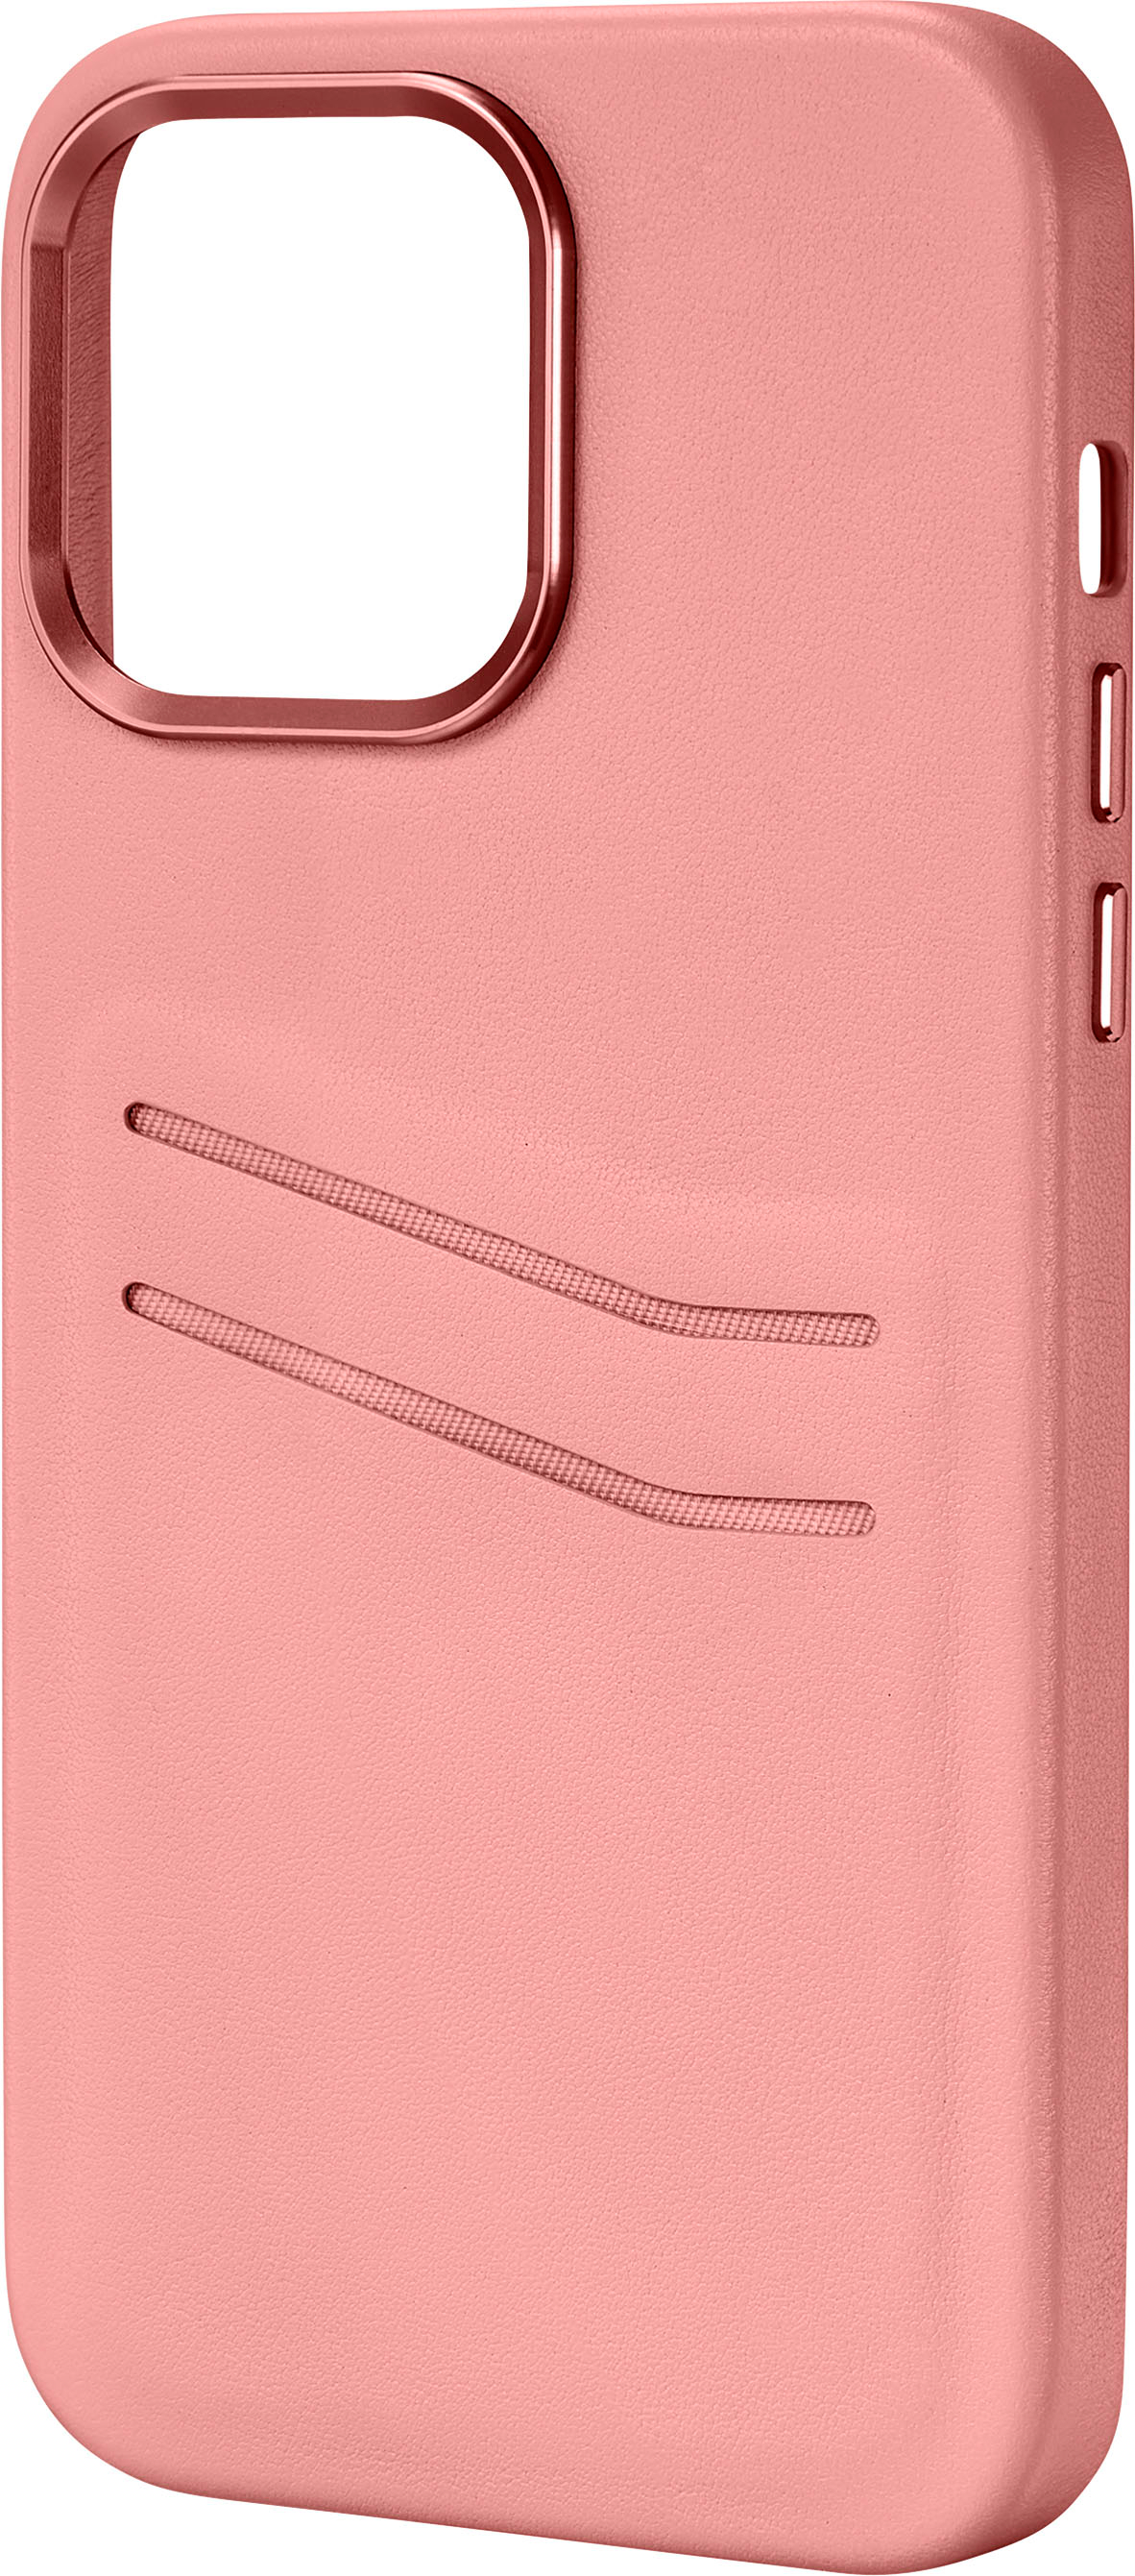 Pink Leather iPhone Wallet Case  £19.99 at Mark Russell Leather